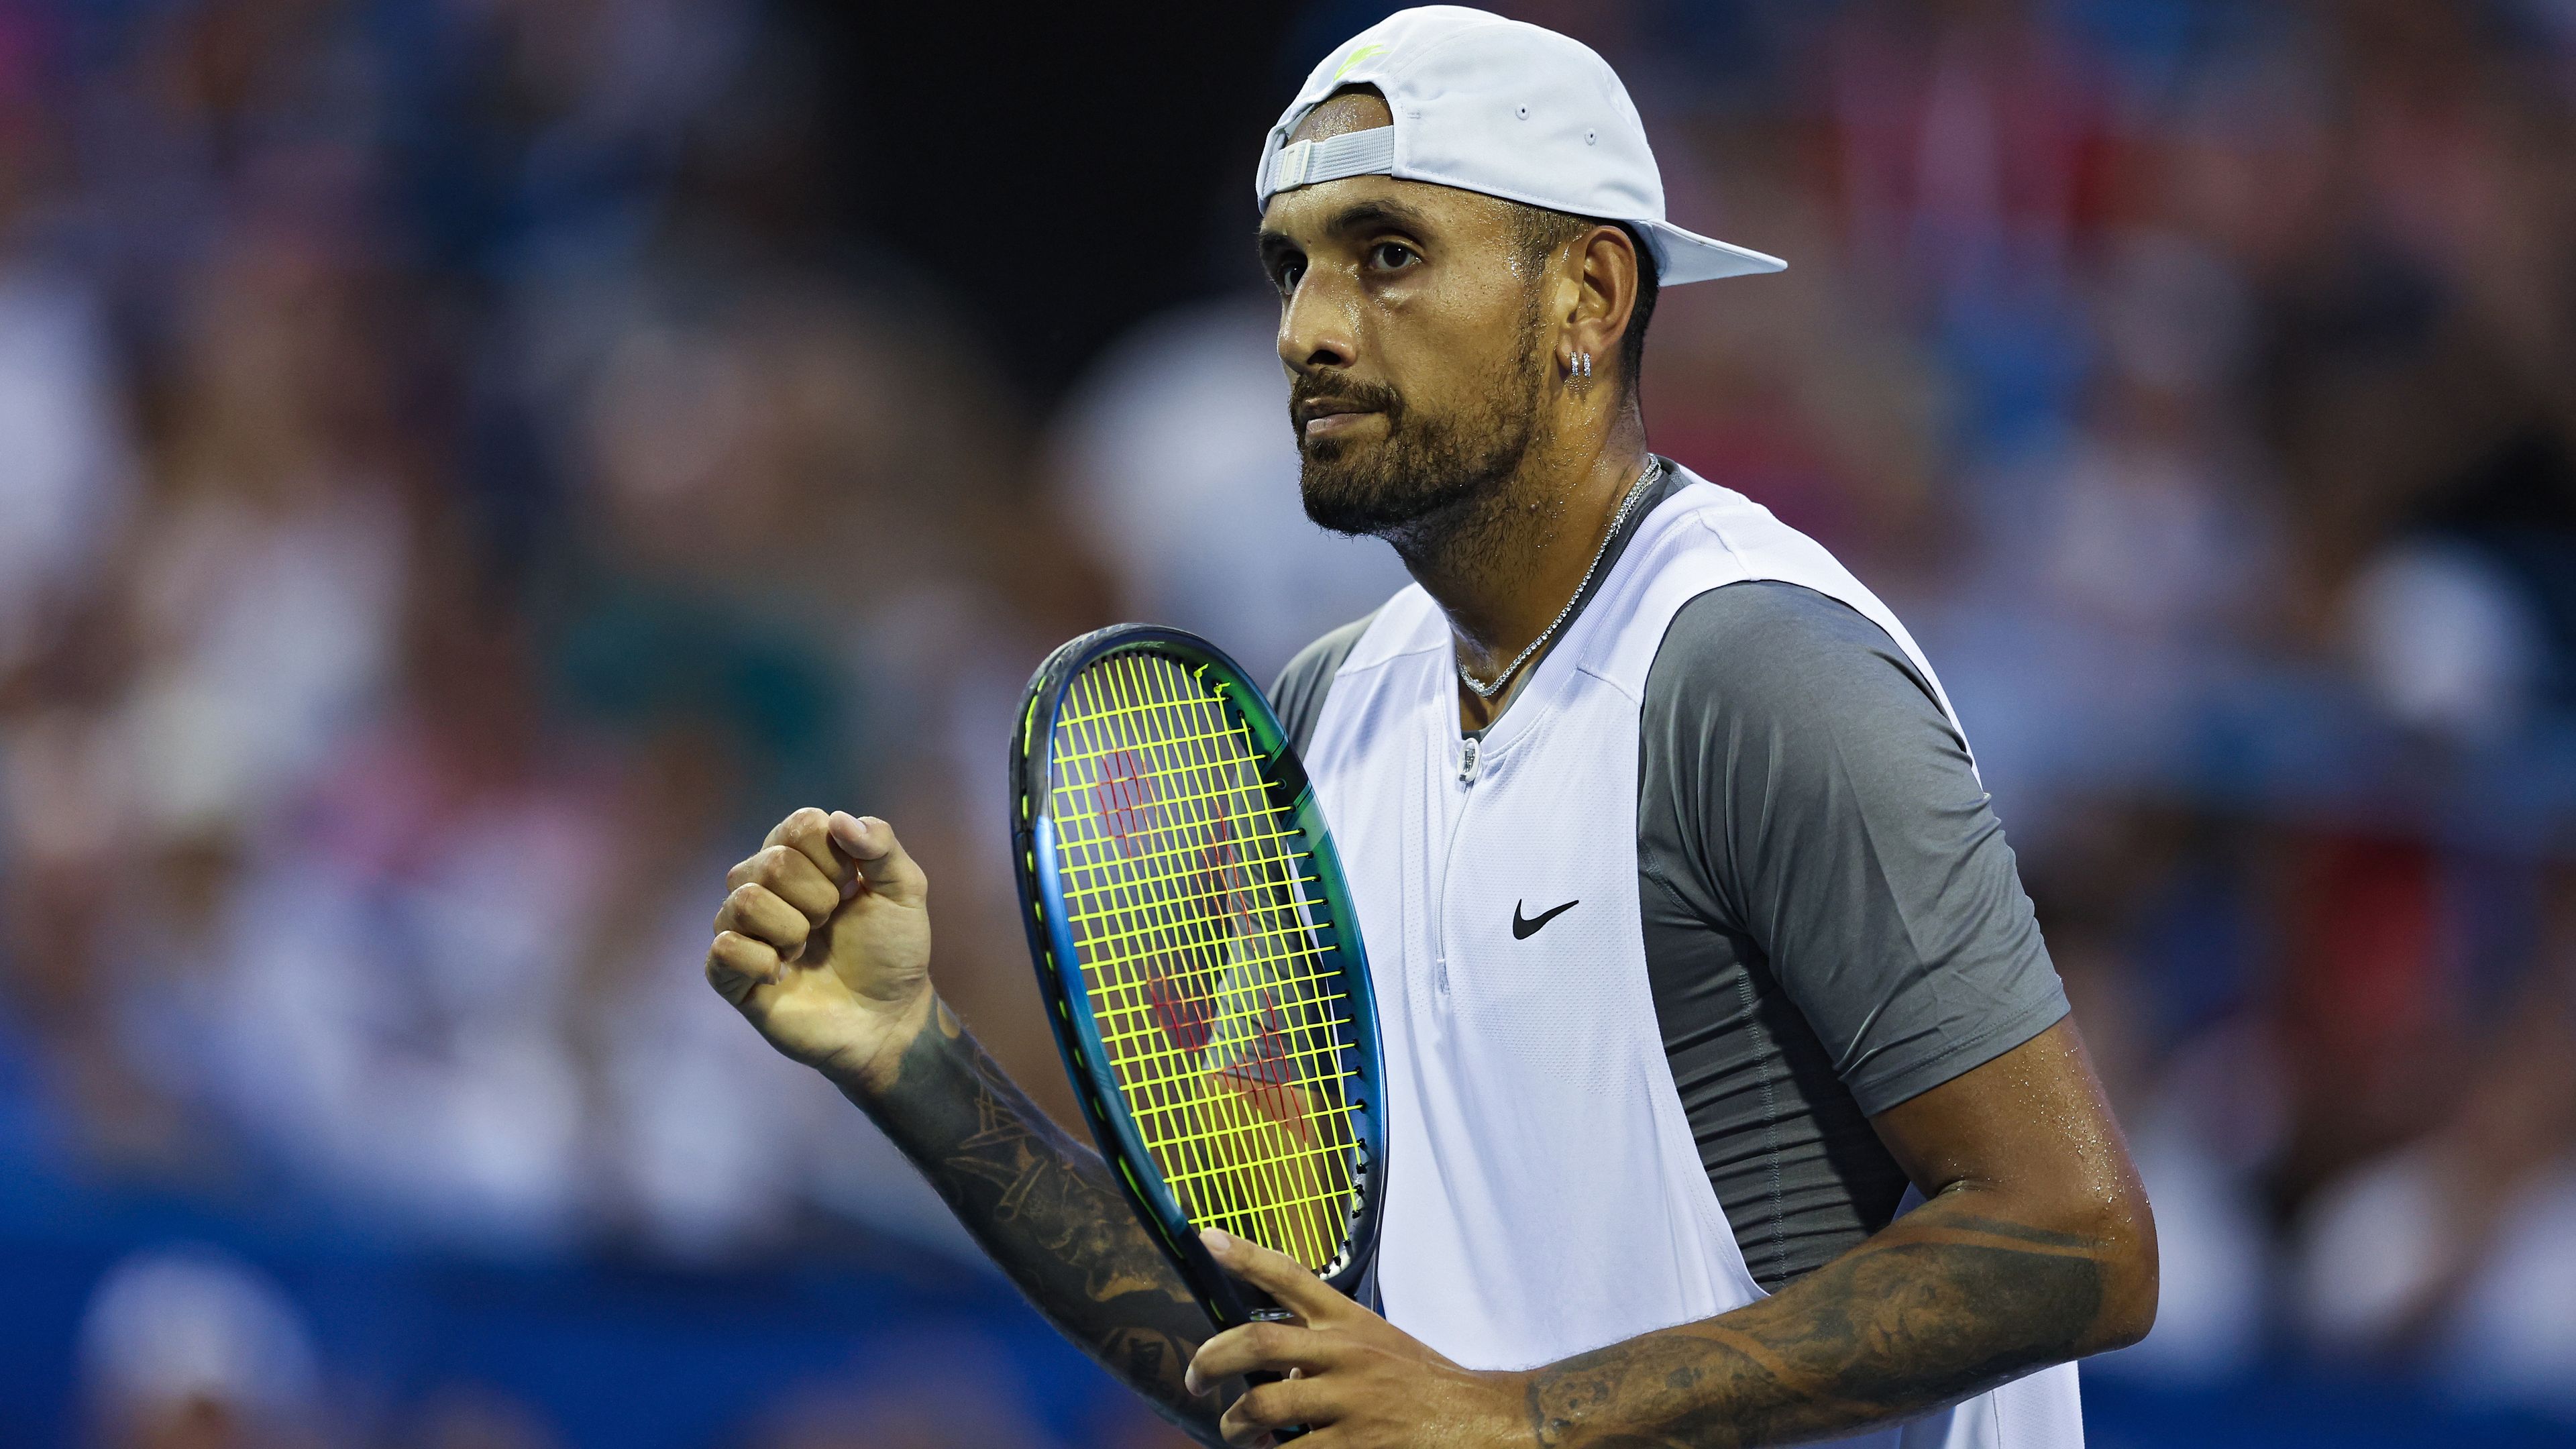 Nick Kyrgios moves into consecutive finals for the first time in his career